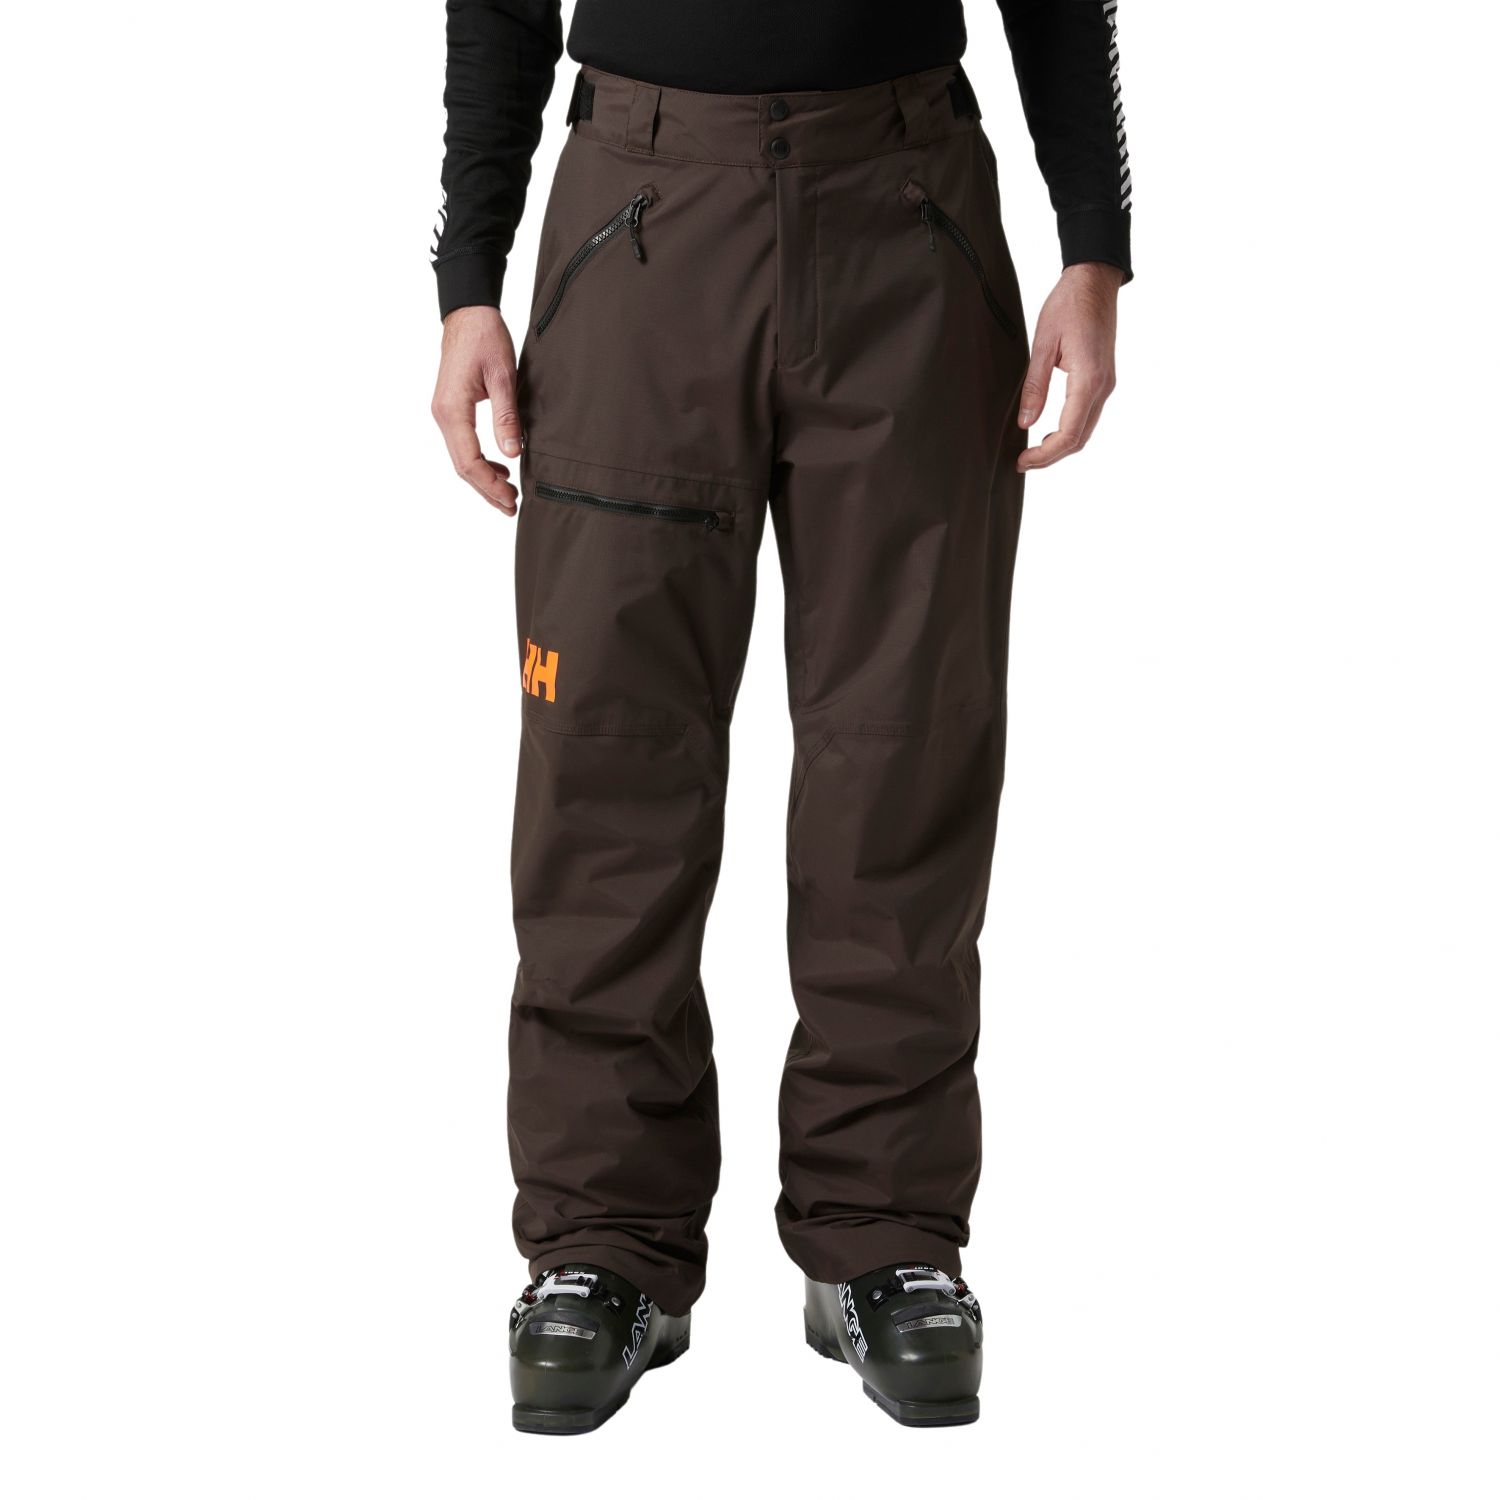 Helly Hansen Switch Cargo Insulated Pant - Ski trousers Women's | Free EU  Delivery | Bergfreunde.eu